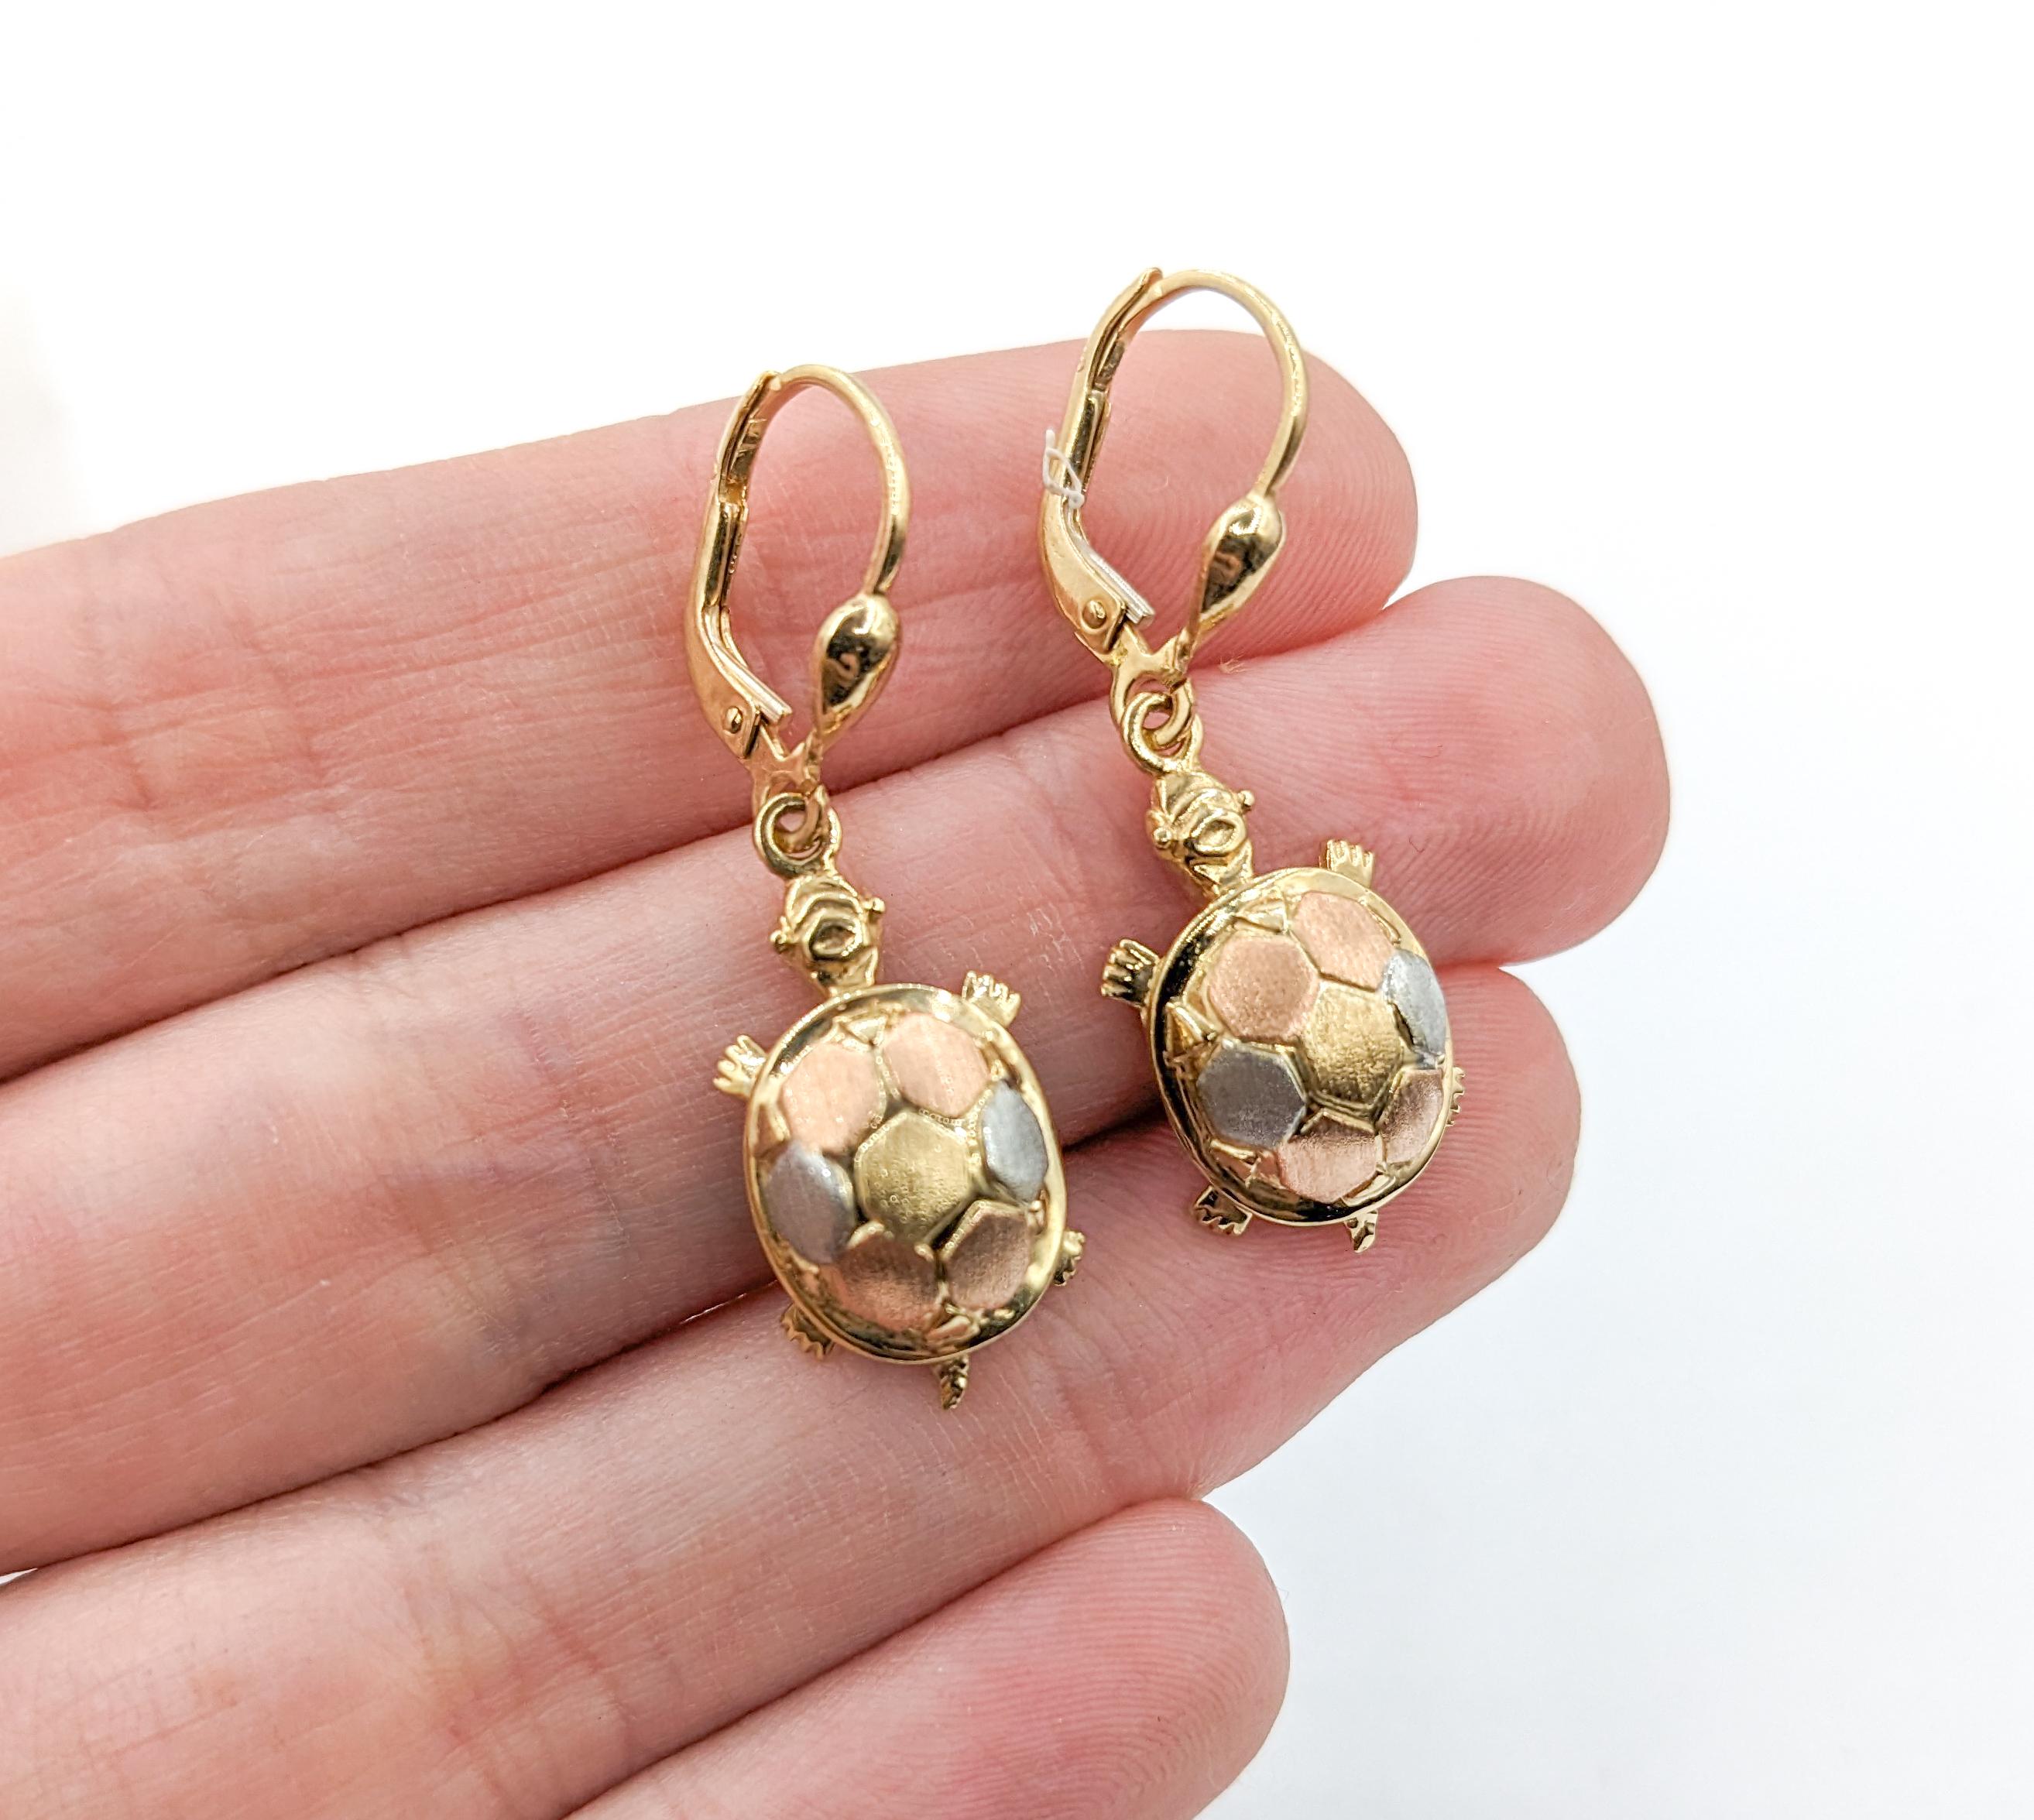 Turtle Dangle Earrings in Tri-Color Gold 

Introducing these exquisite tri-color gold earrings, Turtle dangles crafted in 10kt Tri Color. The Turtle earrings showcase intricate detailing with multi-color shells for added elegance. Sized at